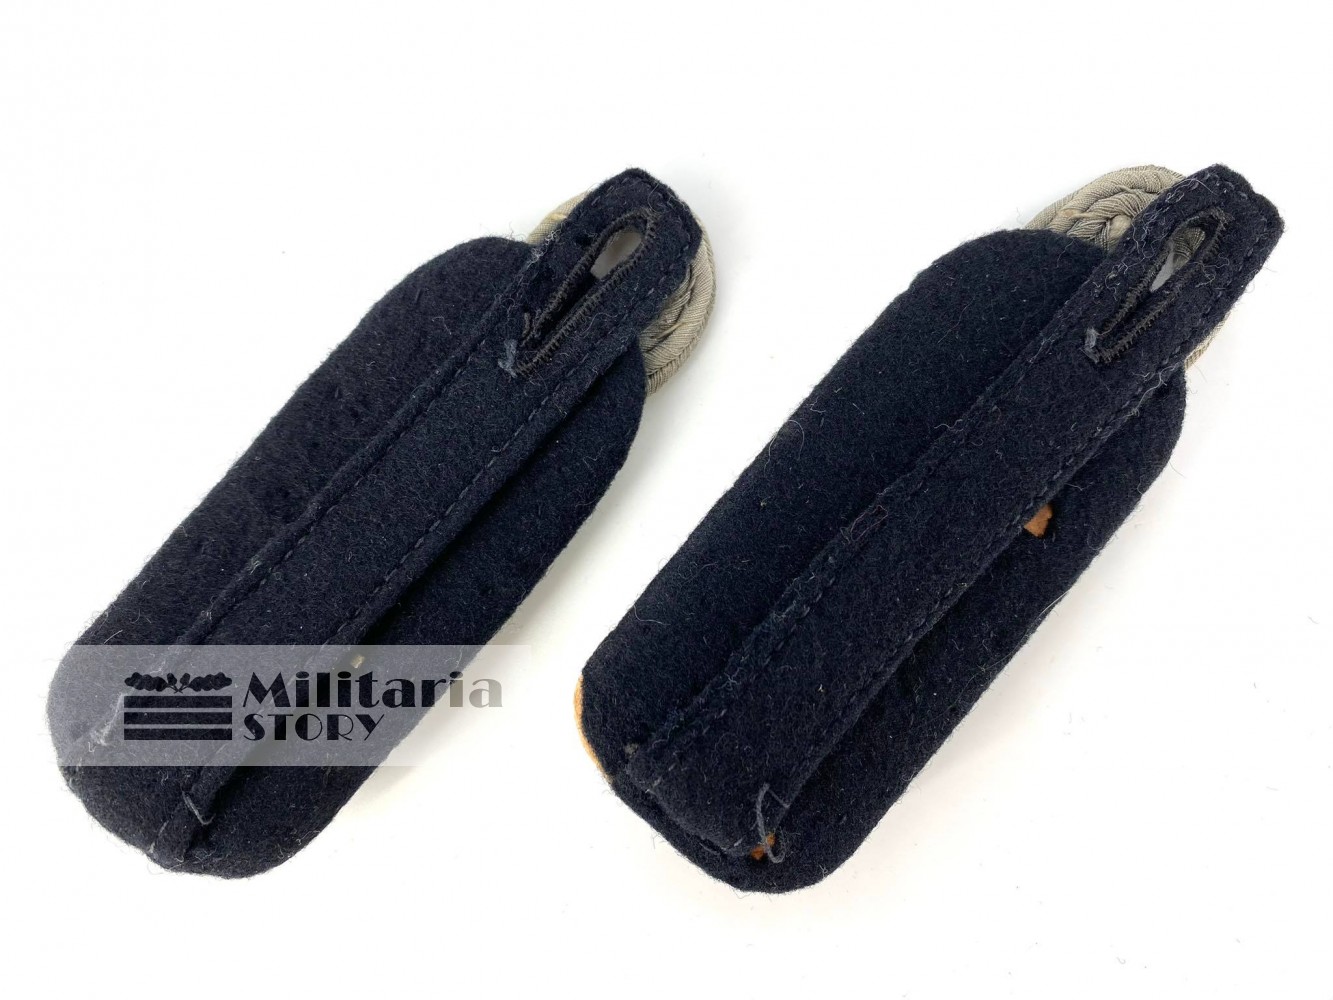 SD/SS Mountain Troops Officer Shoulder Boards - SD/SS Mountain Troops Officer Shoulder Boards: WW2 German Insignia